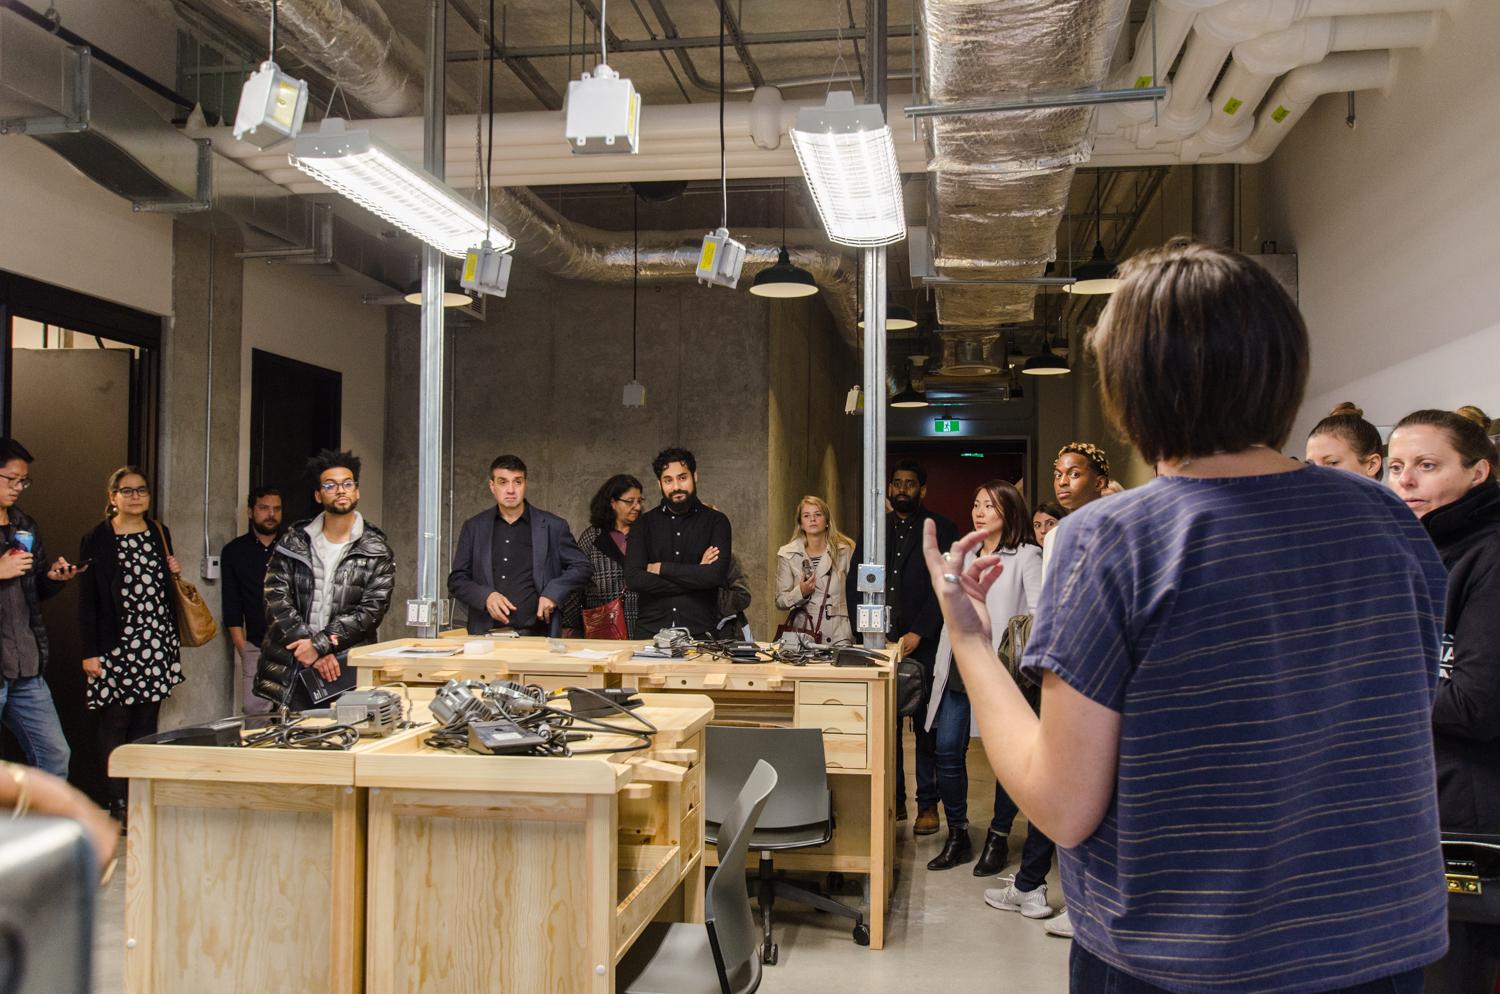 Tor McGlade leading an interior design tour of Artscape Daniels Launchpad, showing the group a prototyping workshop with wooden work stations